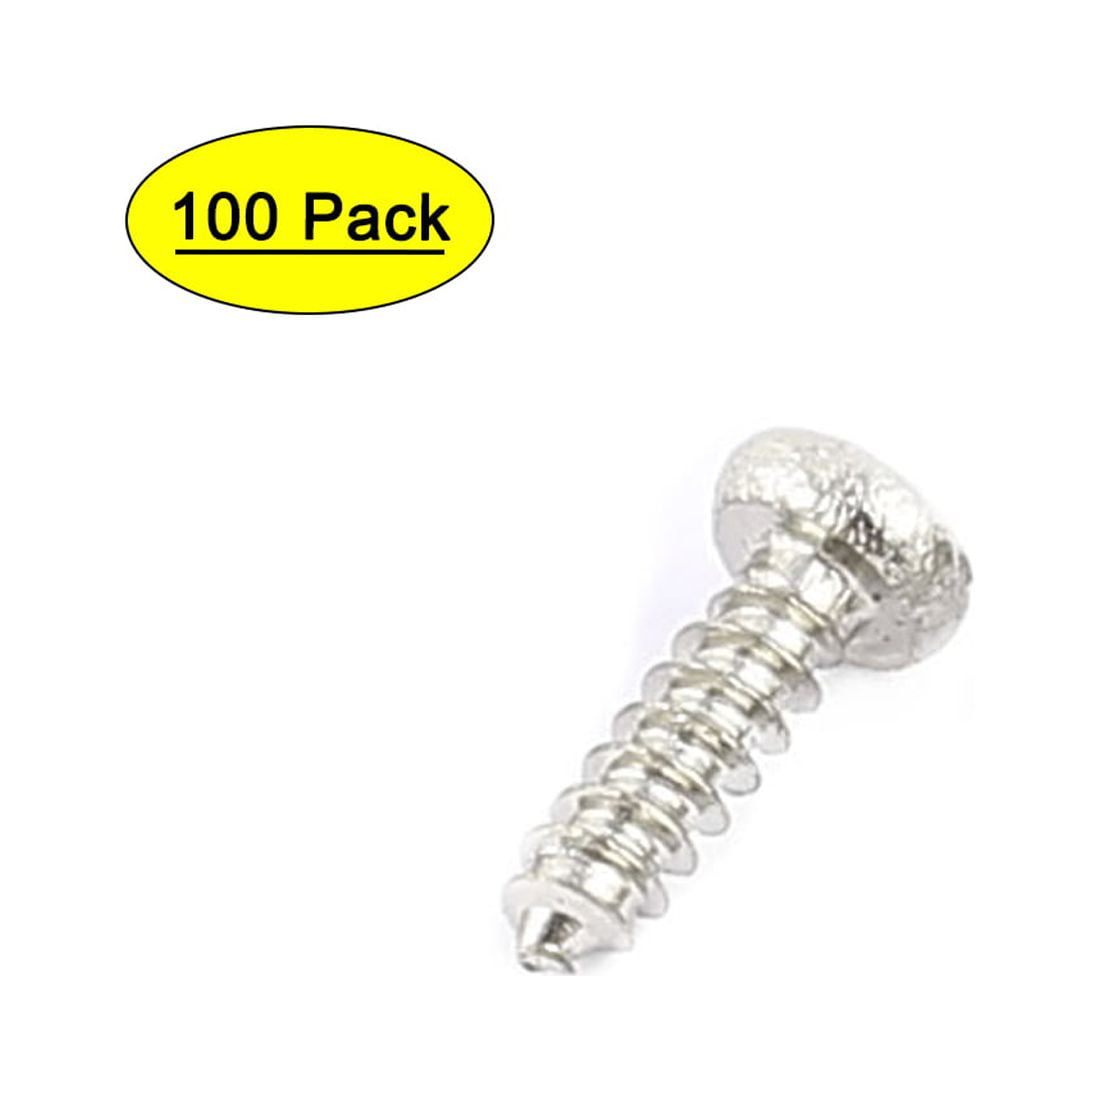 Uxcell M1.4 x 5mm Stainless Steel Round Head Self Tapping Screws Bolts  (100-pack)